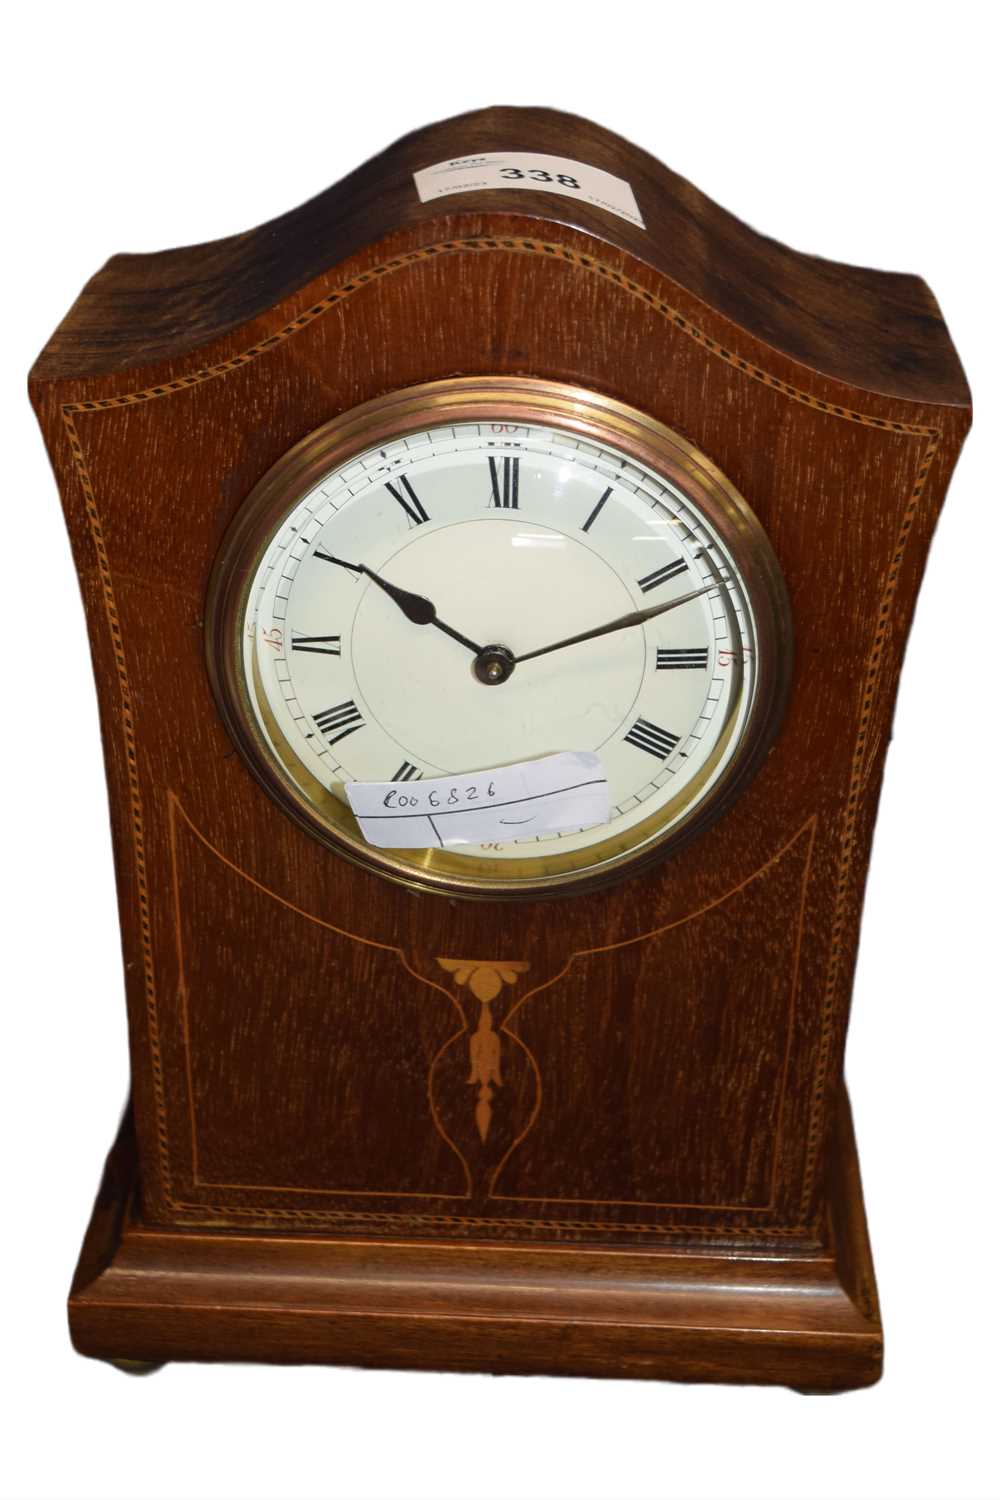 Edwardian mantel clock with inlaid decoration and French movement